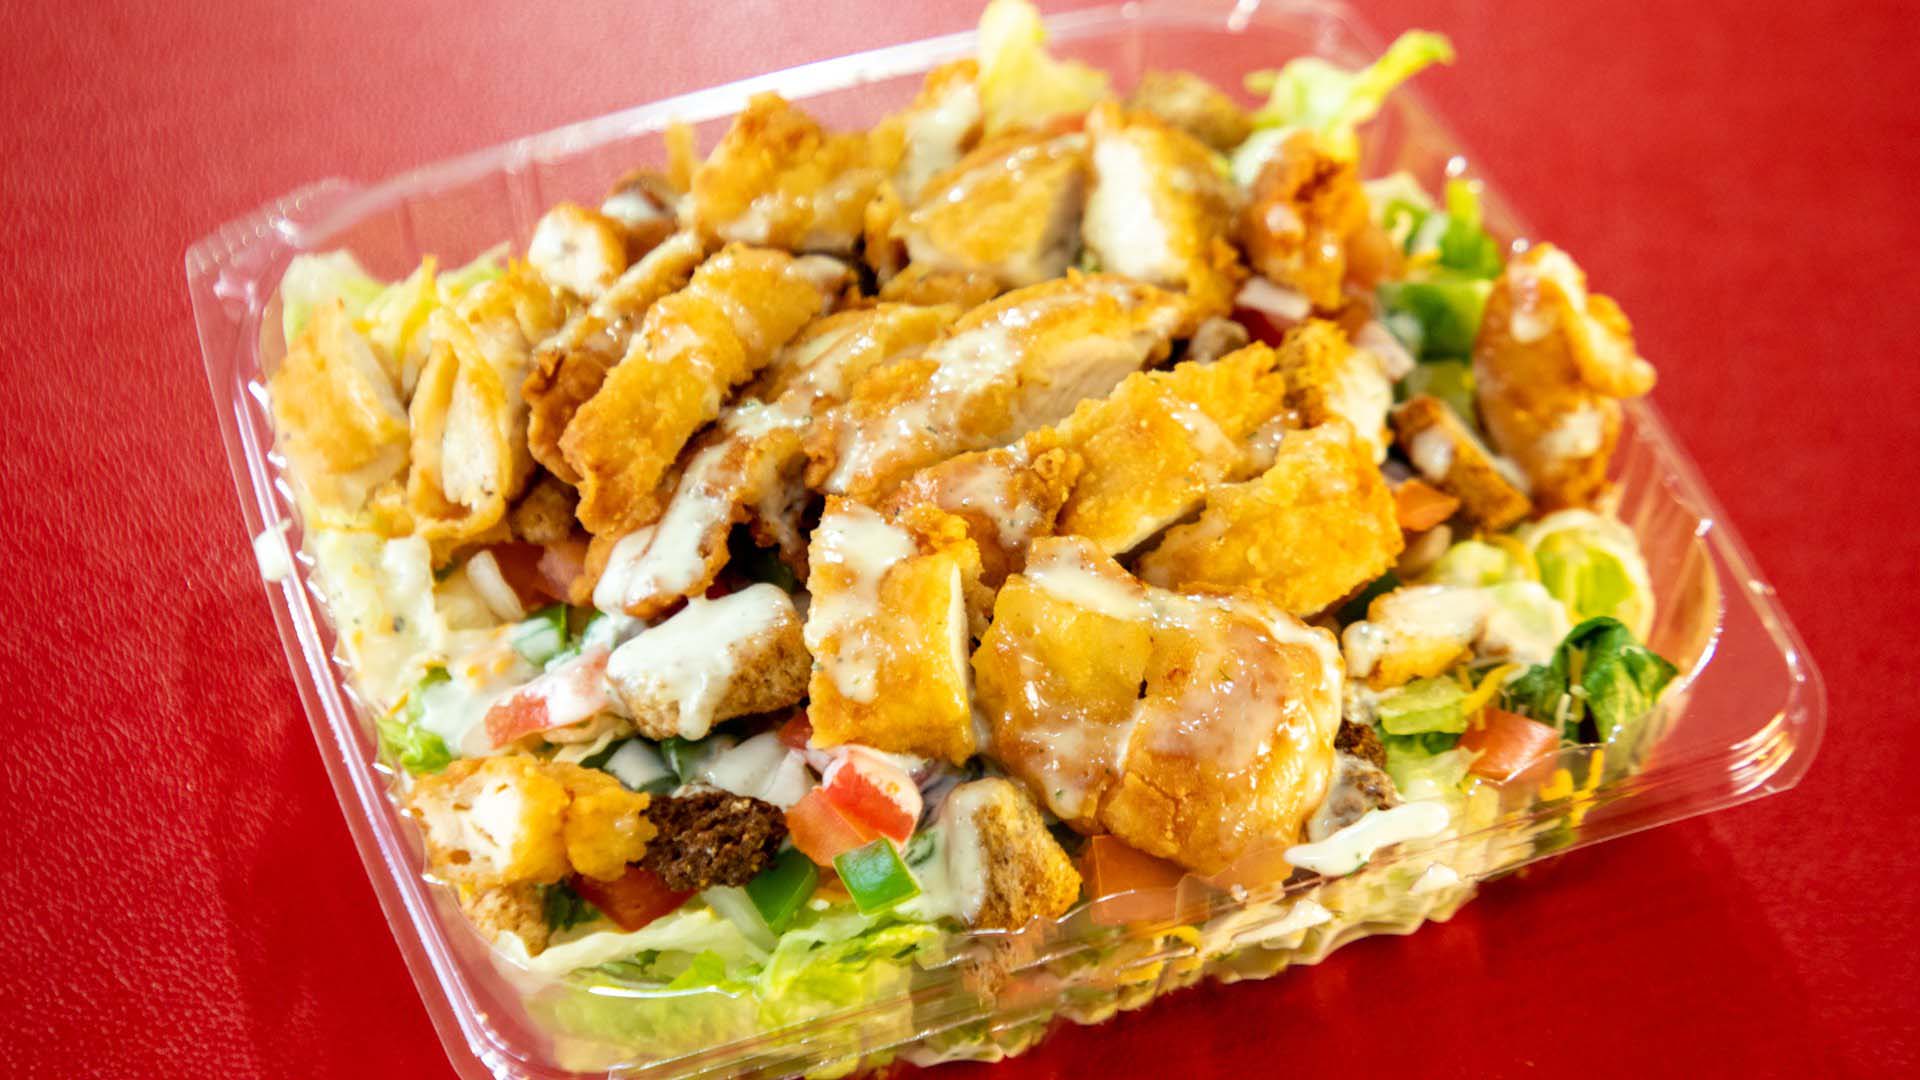 A crispy chicken salad with ranch dressing in a plastic container.